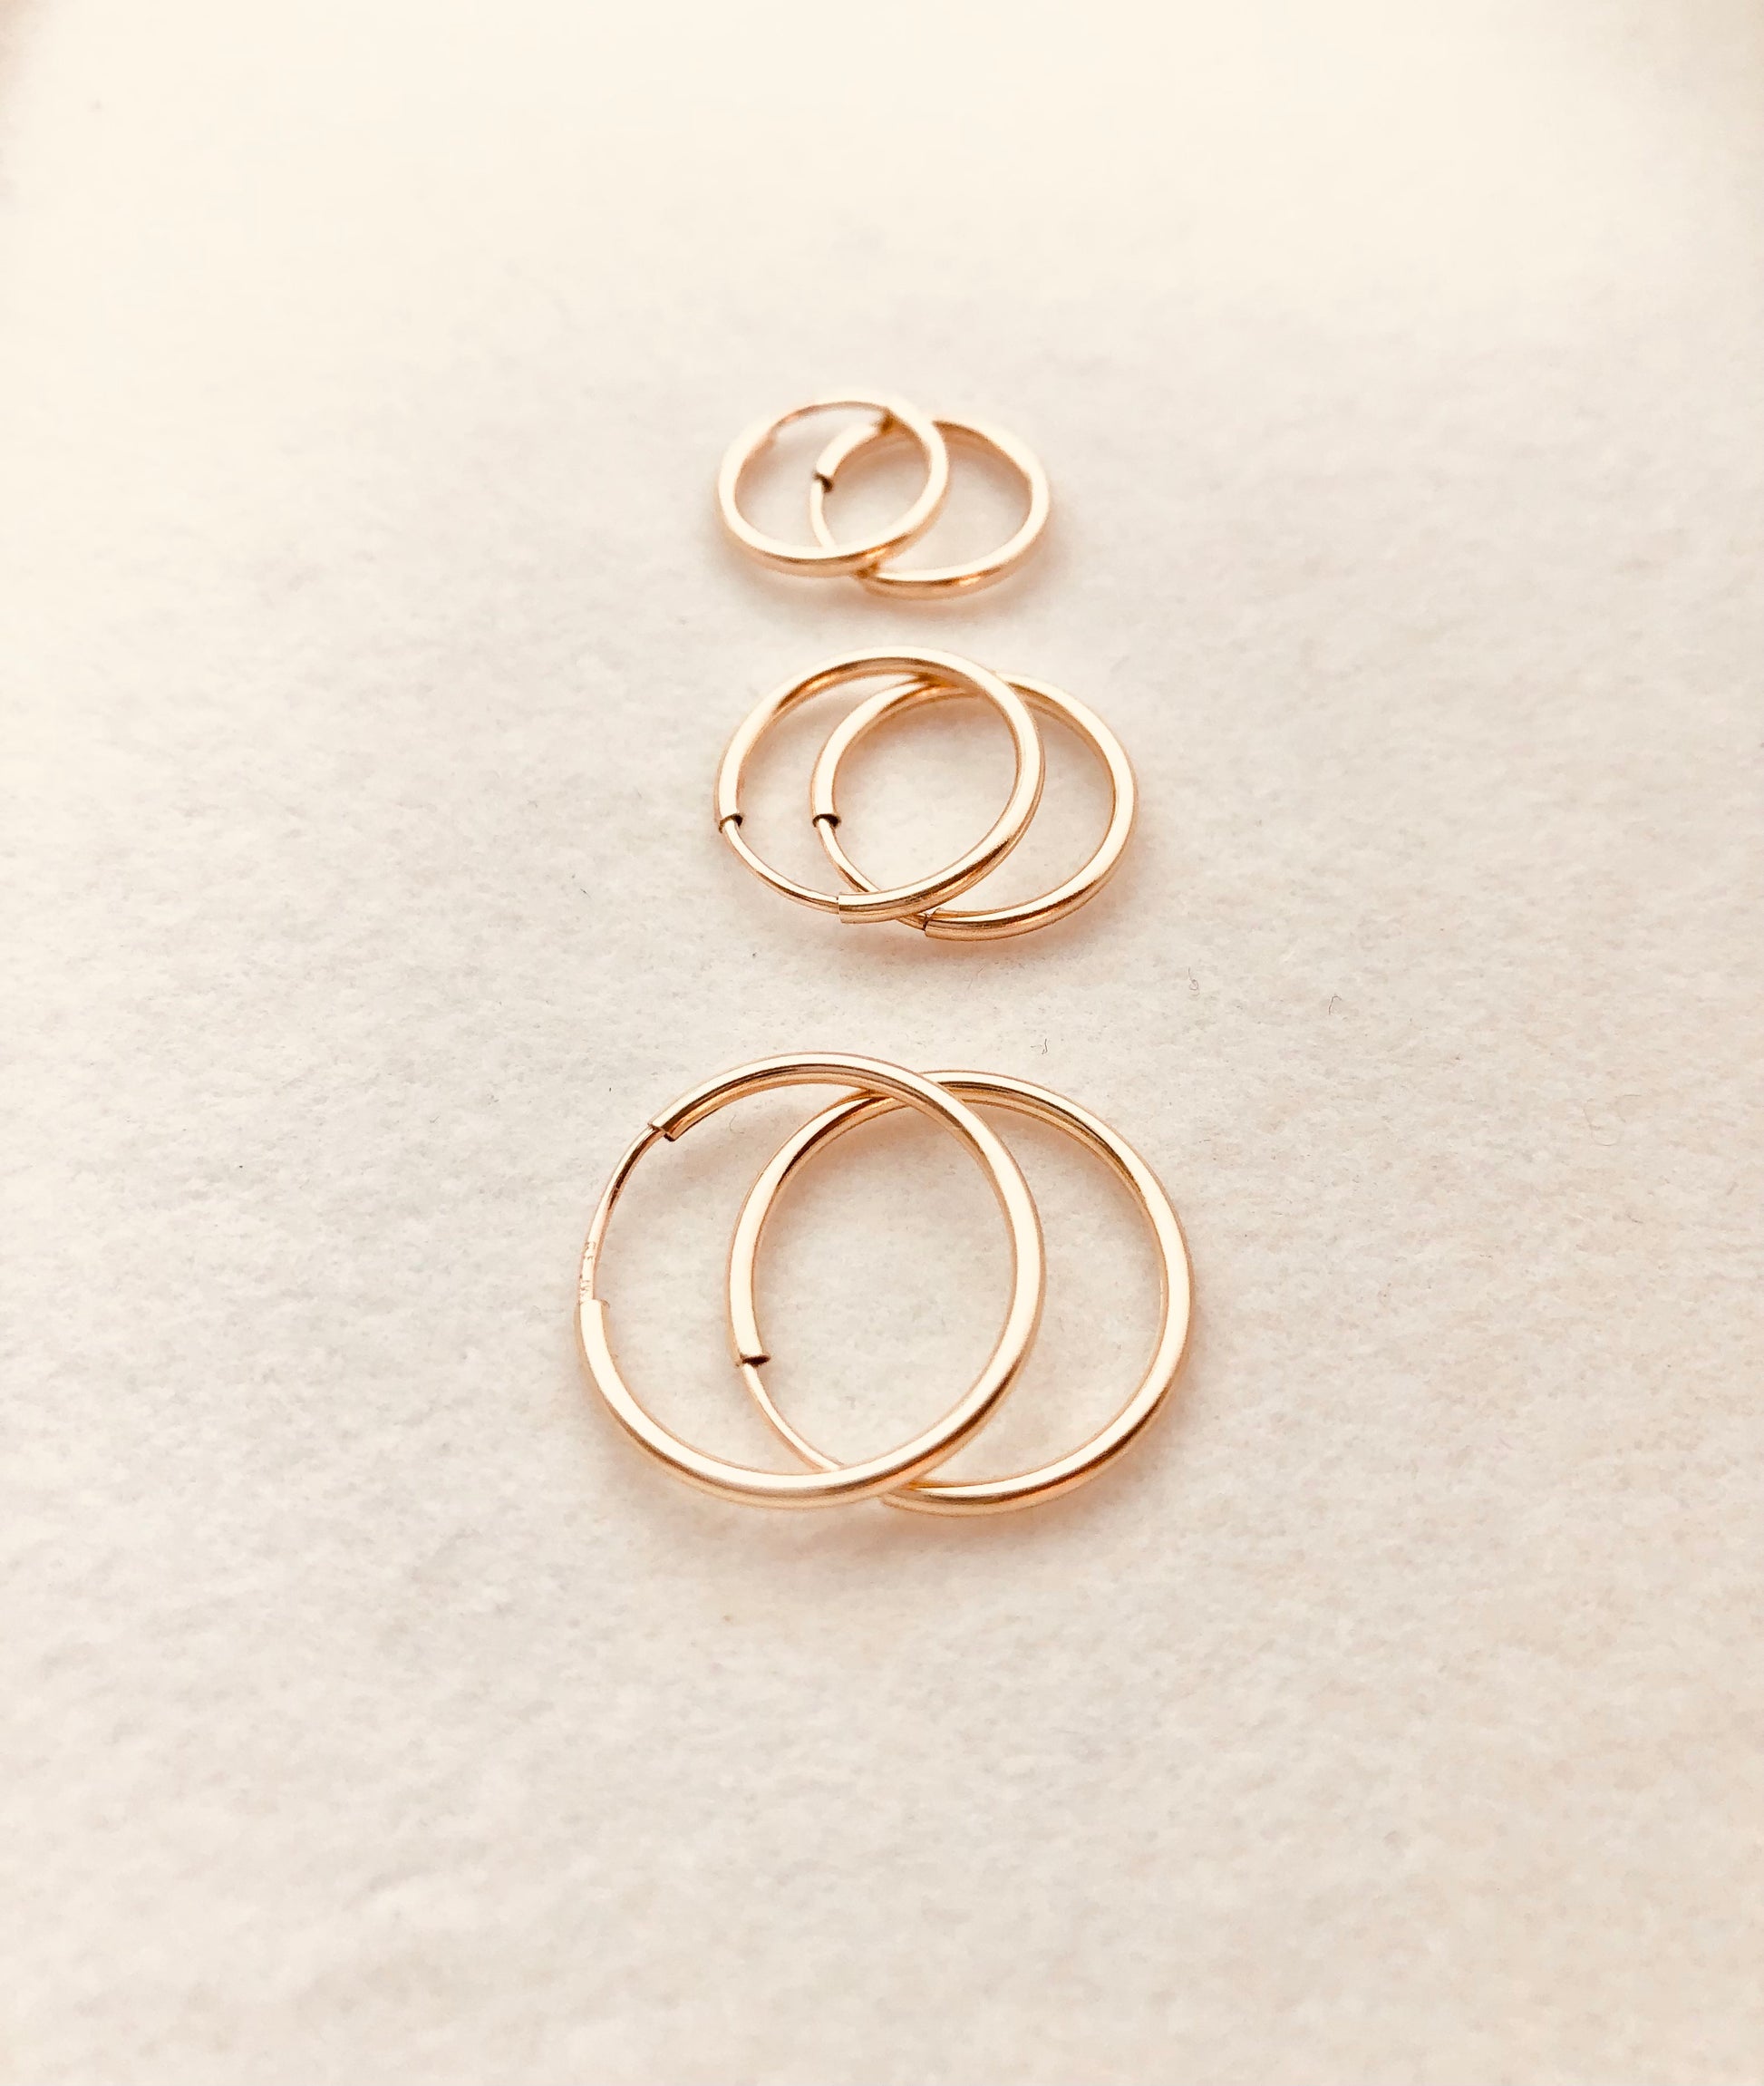 Everyday Hoop Earrings, Endless Hoop Earrings, Dainty Hoop Earrings, Gold Hoop Earrings, Silver Hoop Earrings, Mothers Day, Birthday Gift, Office Outfit, Delicate Jewelry, Mothers Gift, Coco Wagner Jewelry, Gift For Her, Gift Ideas,  Birthday Gift, Mothers Gift, Christmas Gift Ideas, Mothers Day Gift  Minimalist Jewelry, Everyday Jewelry, 